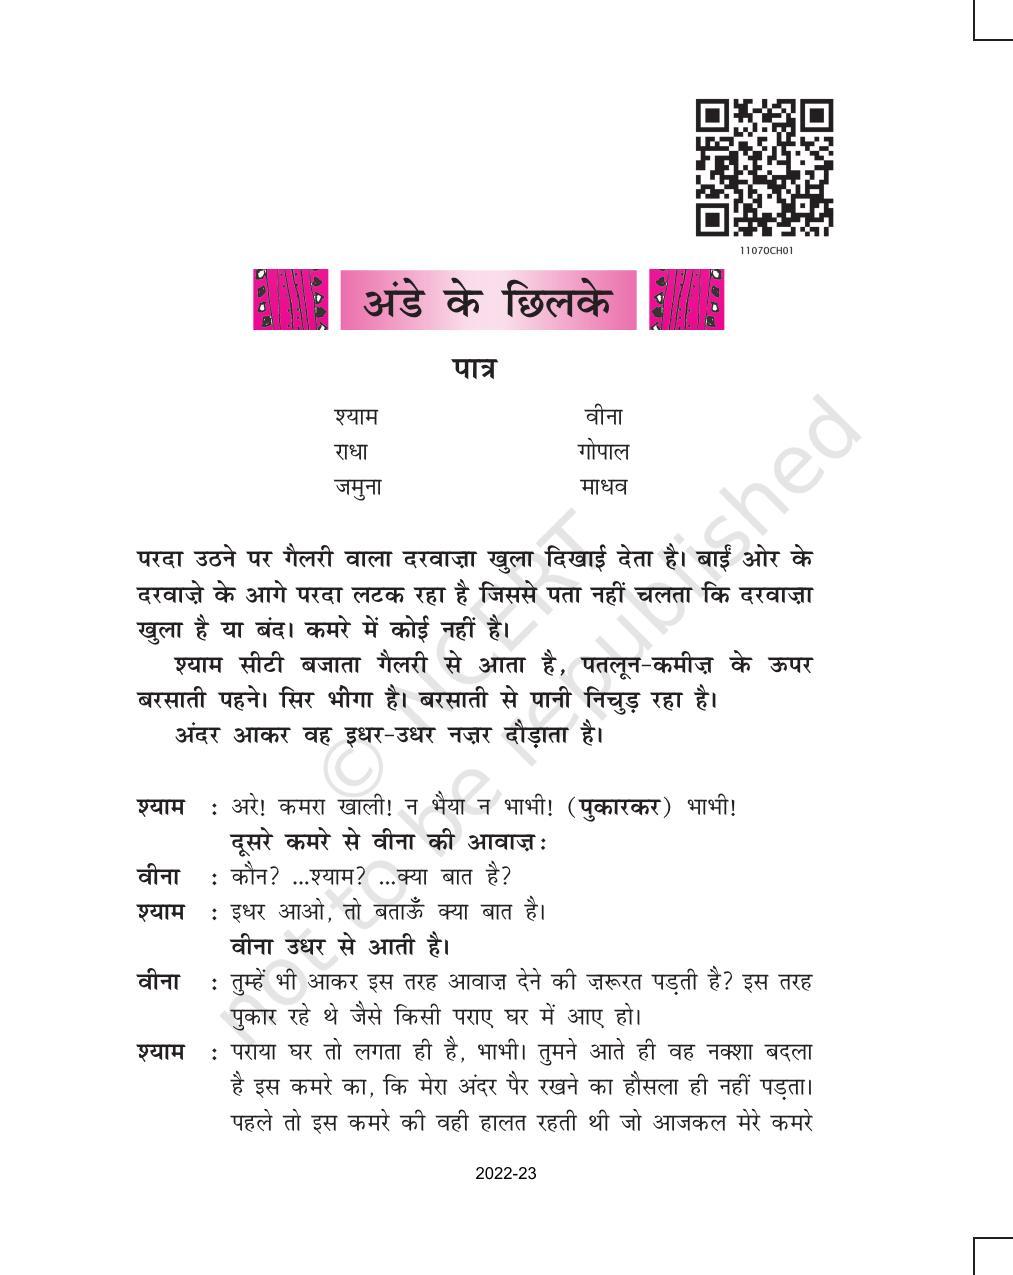 NCERT Book for Class 11 Hindi Antral Chapter 1 अंडे के छिलके - Page 1